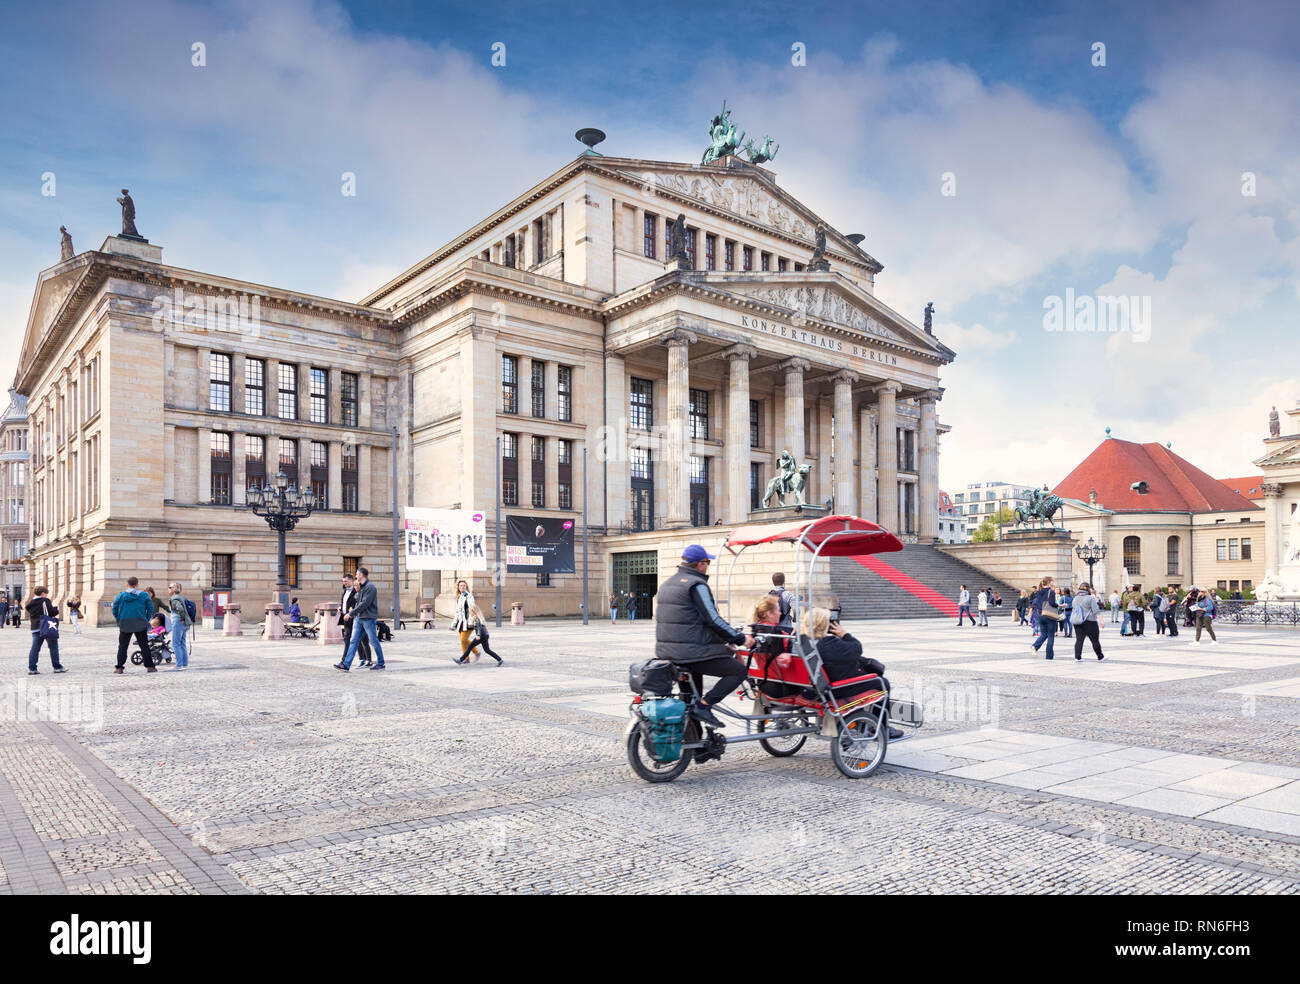 22 September 2018: Berlin Germany - Sightseeing in Gendarmenmarkt, with the Konzerthaus and a rickshaw or bike taxi. Slight motion blur on bike at 100 Stock Photo